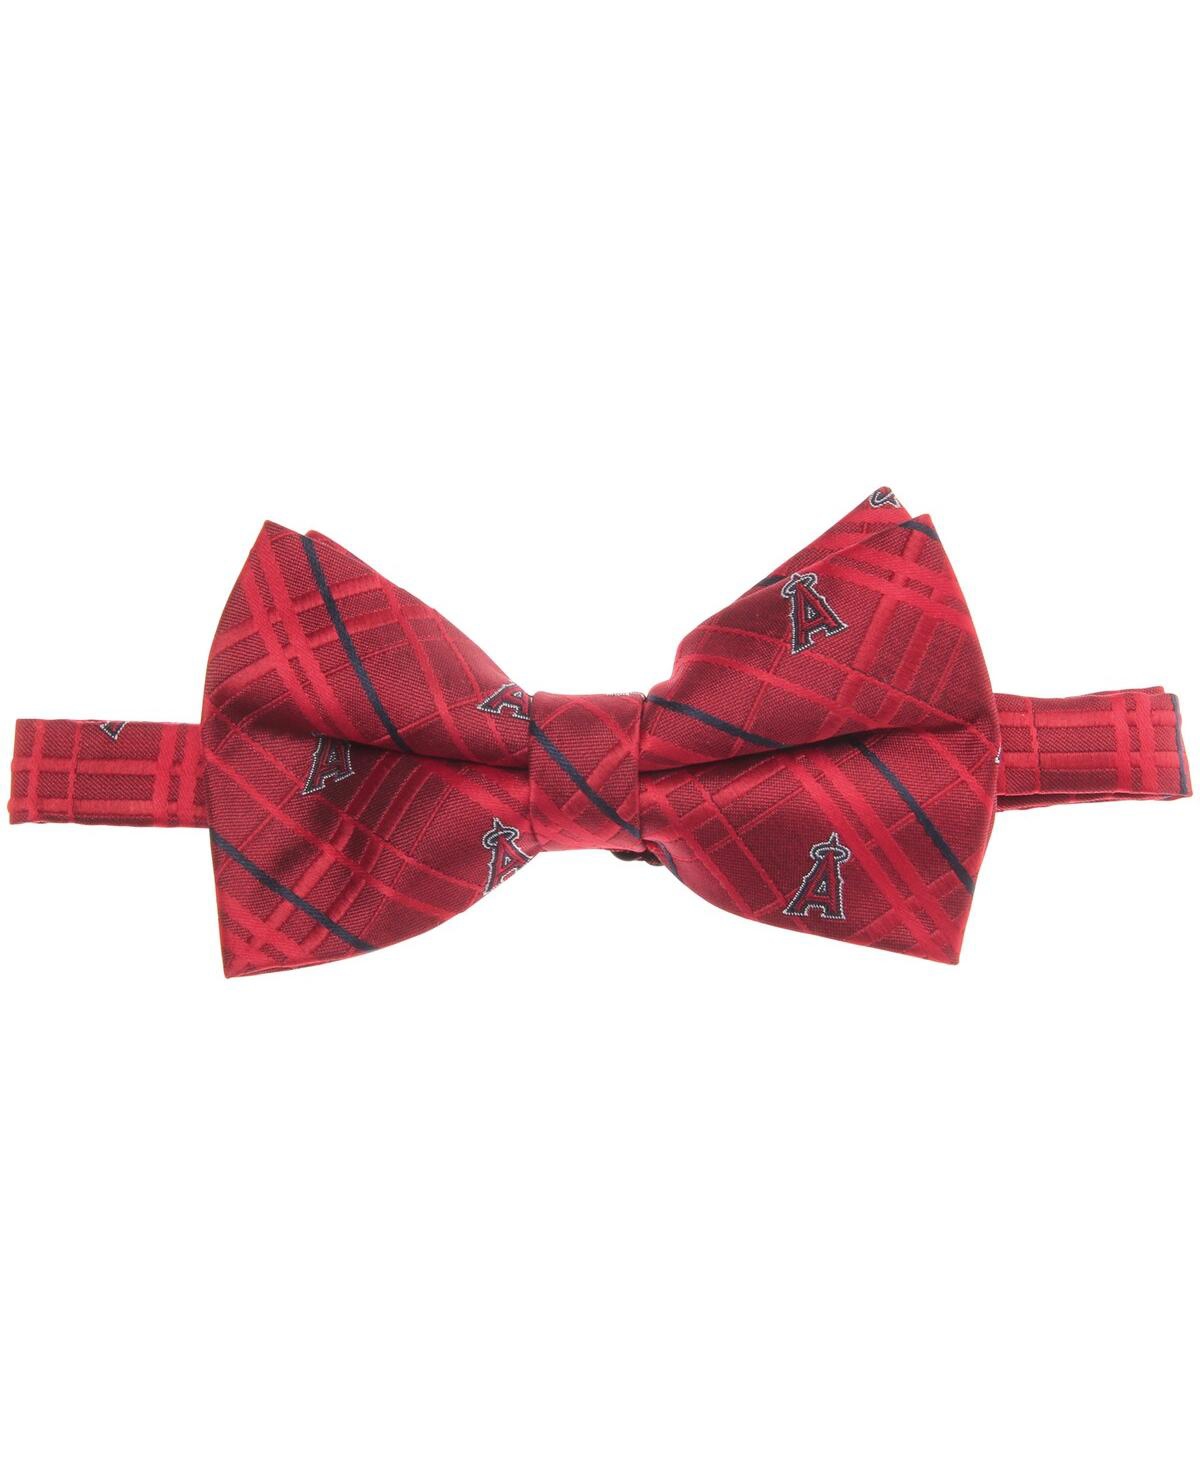 Shop Eagles Wings Men's Red Los Angeles Angels Oxford Bow Tie